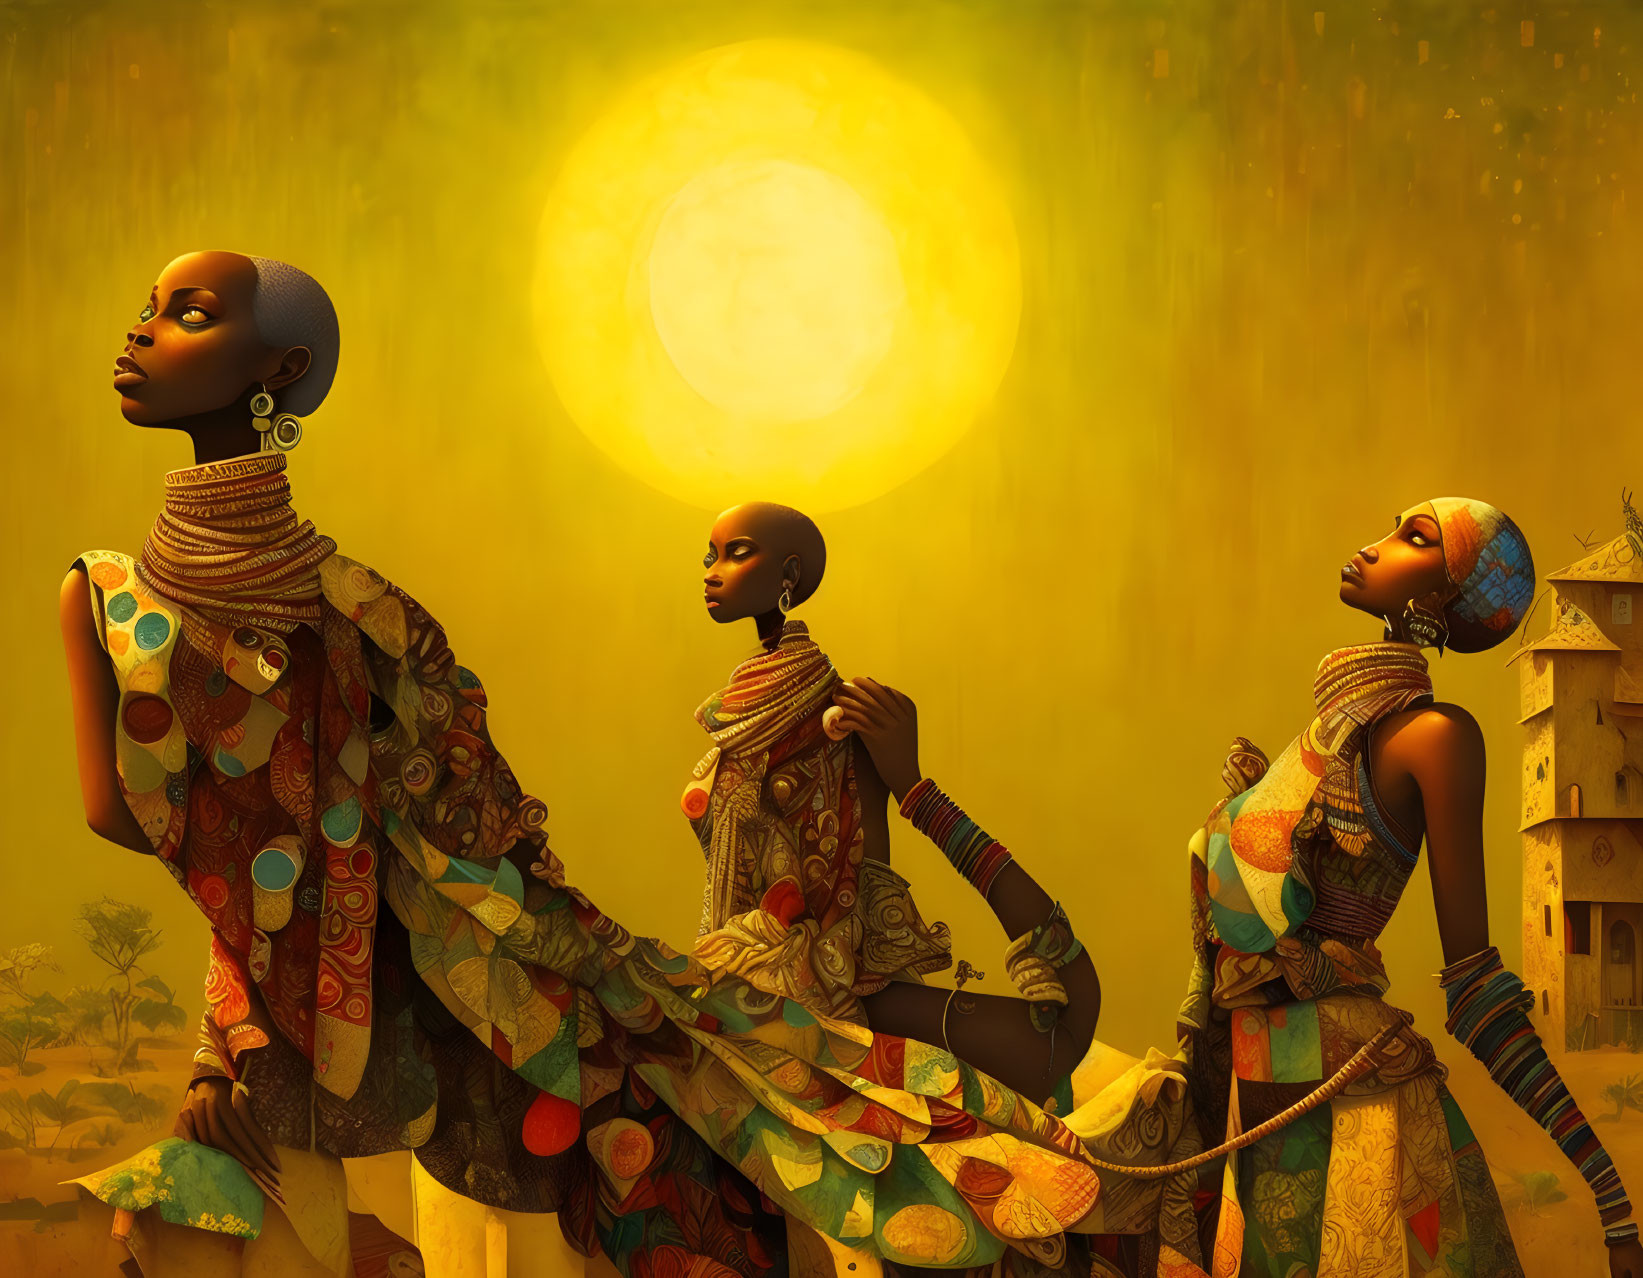 Colorful Stylized Figures Against Golden Sunset Backdrop